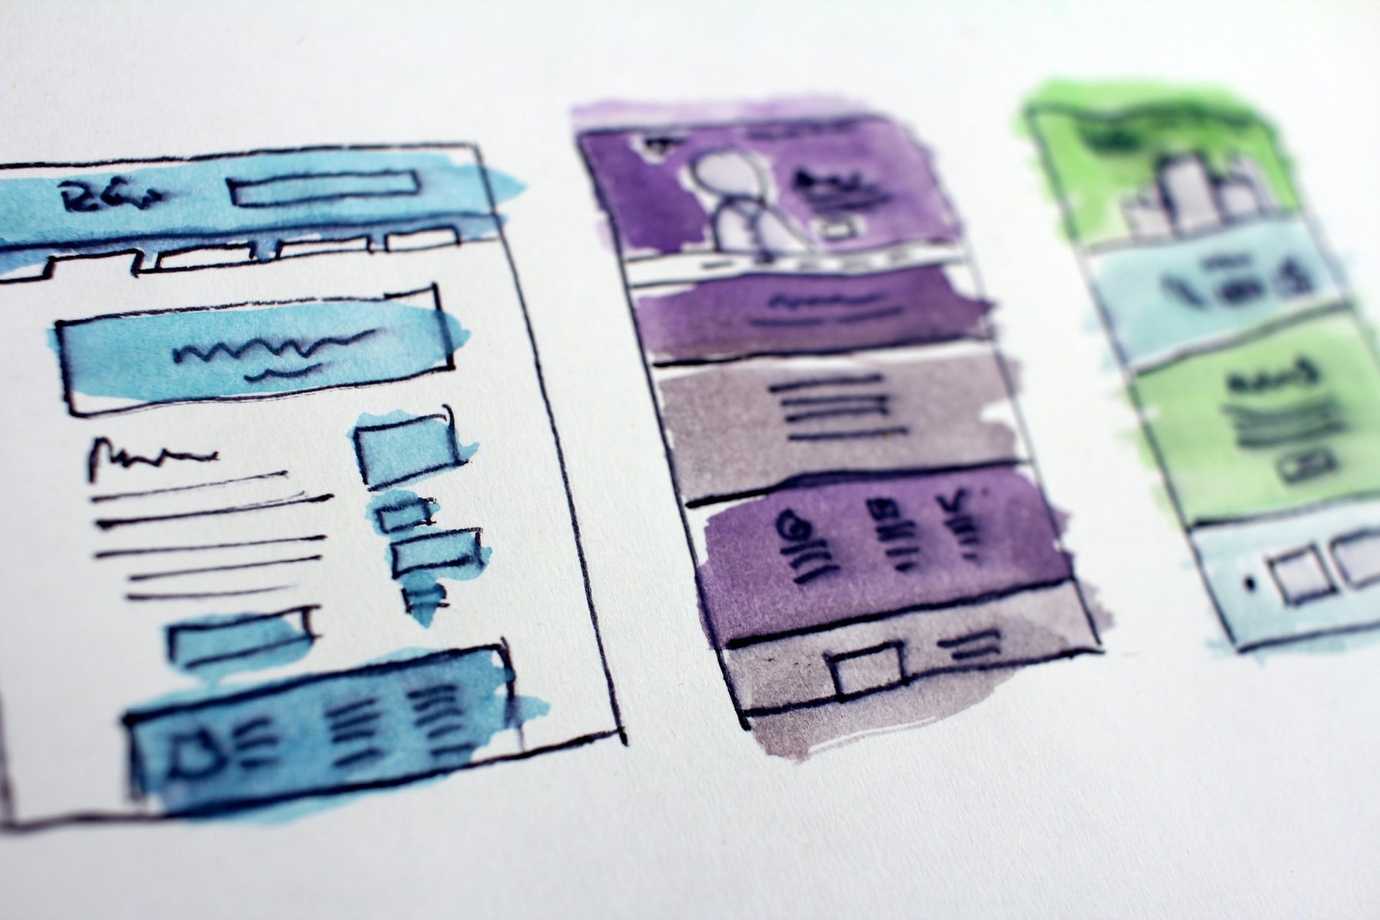 Photo by Hal Gatewood of wireframe sketches, found at Unsplash